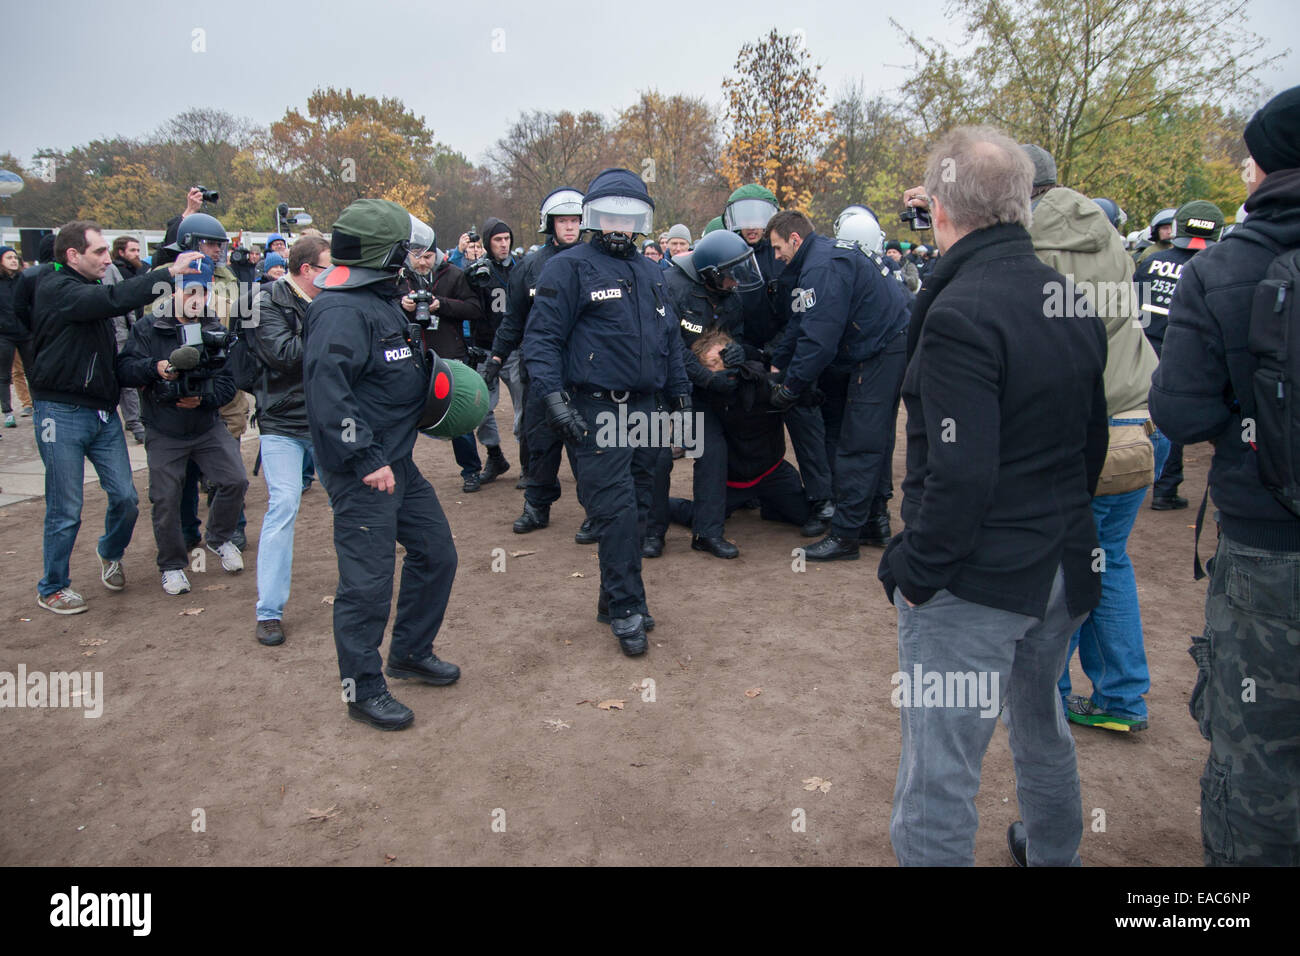 Demonstration by German Reichsbürger movement at Reichstag in Berlin, Germany. Police arrests a counter protester. Stock Photo